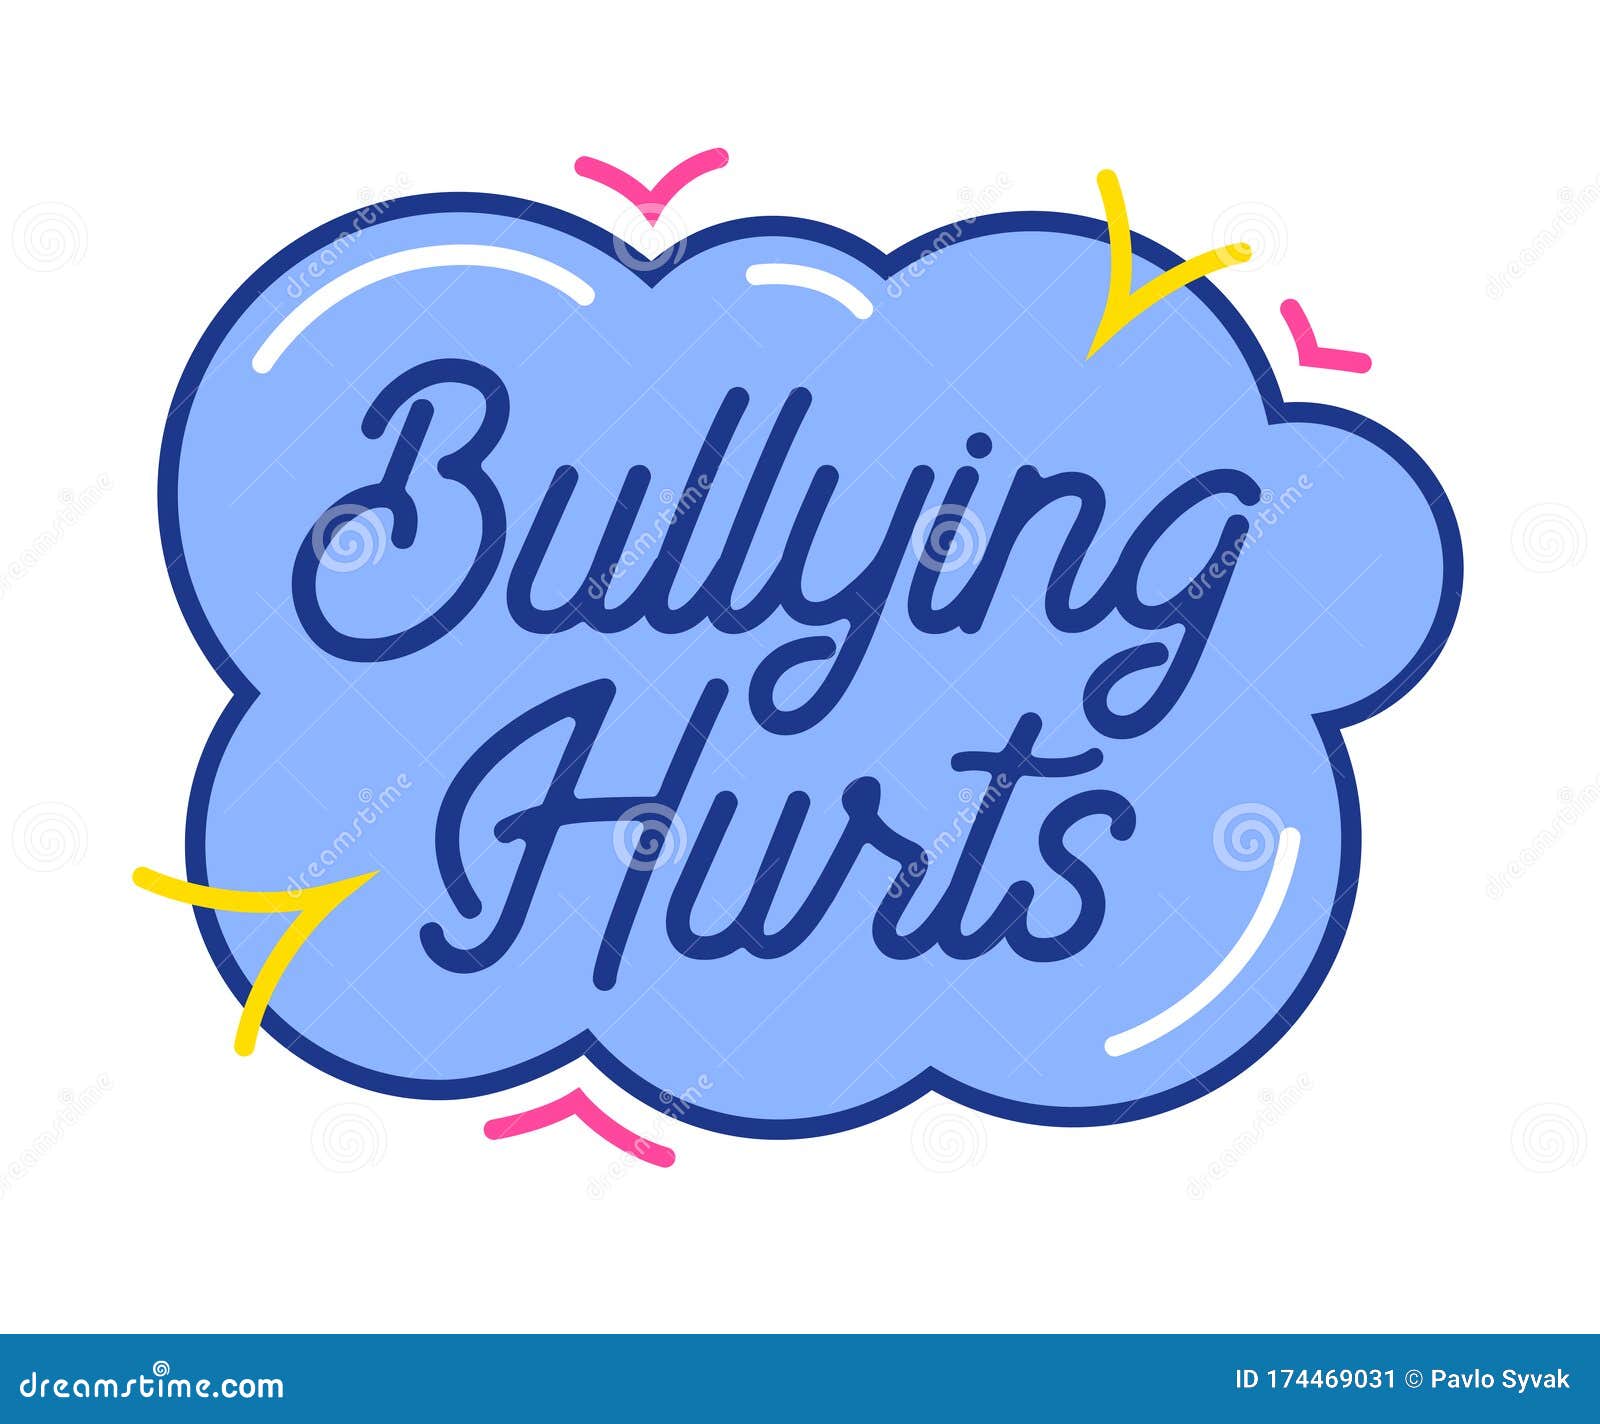 bulling hurts typography in cloud with colorful random s  on white background. anti cyber bullying